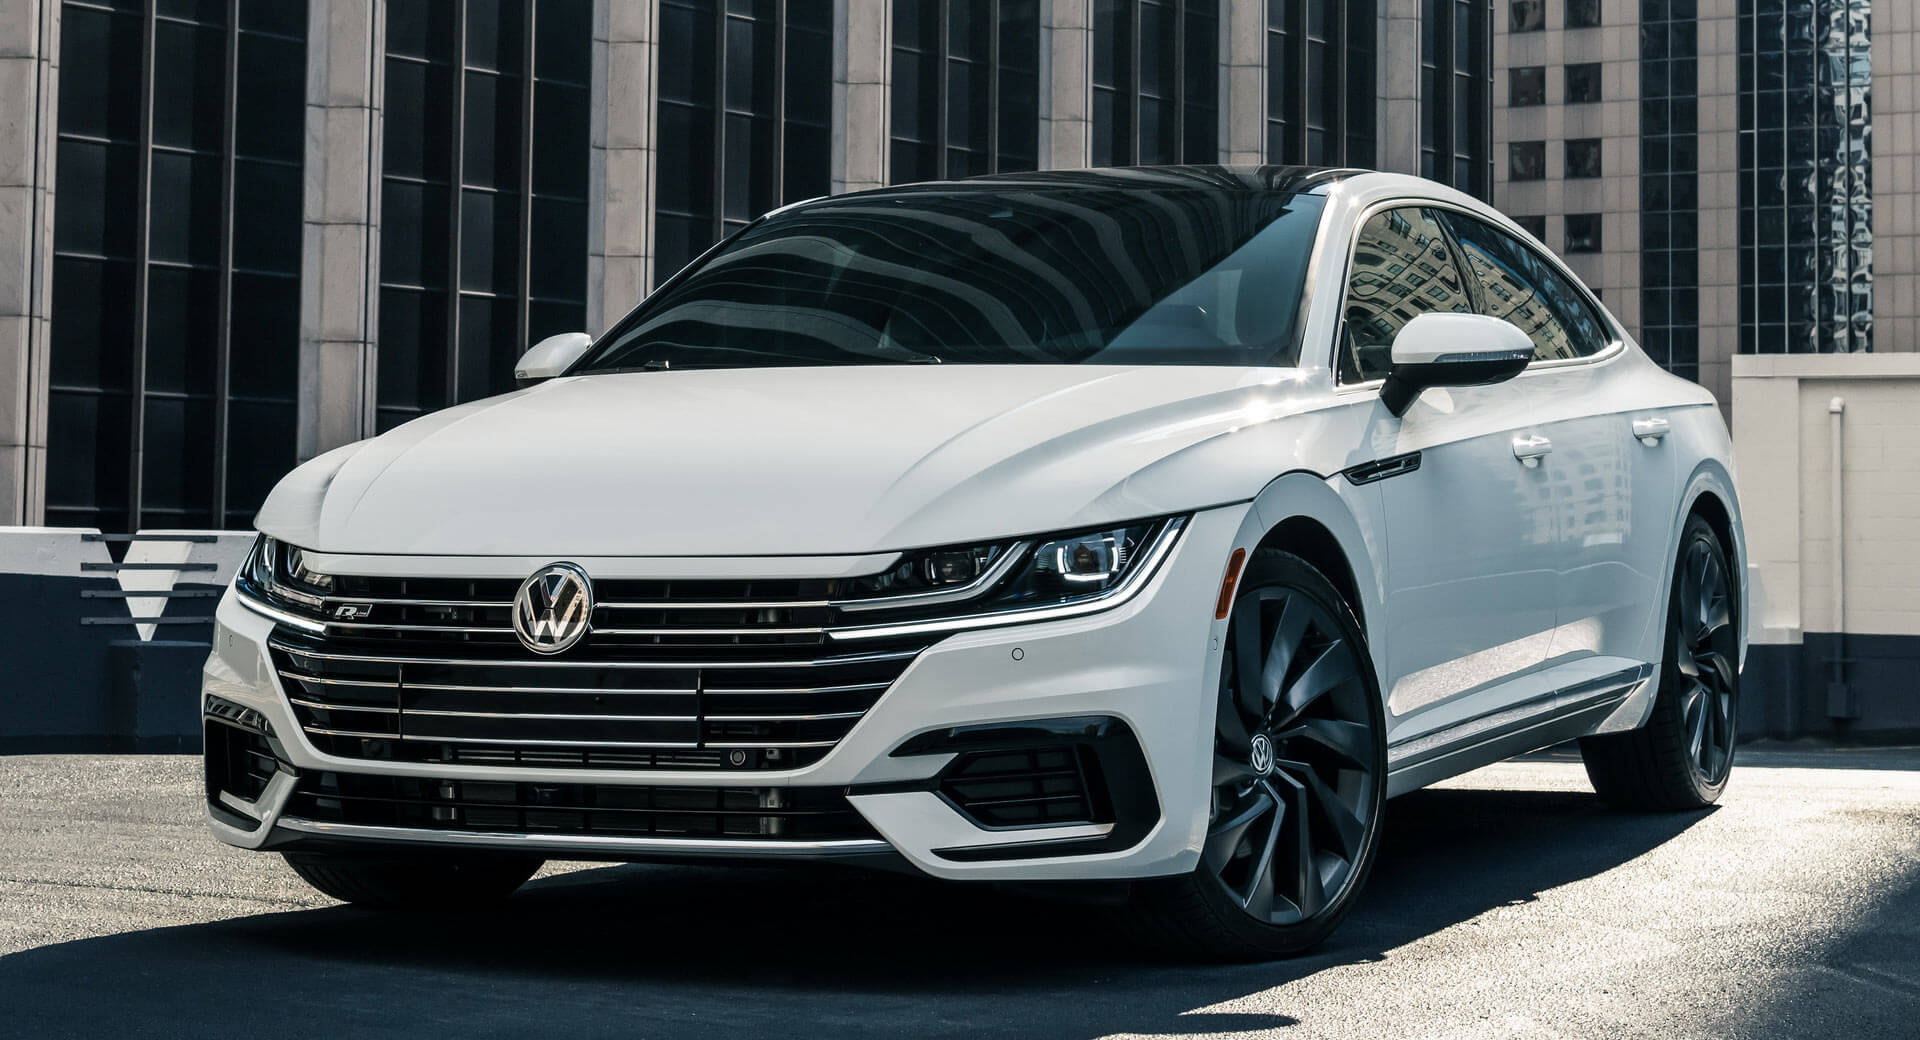 2019 Volkswagen Arteon First Drive Review Does It Have a Chance in the U.S.?